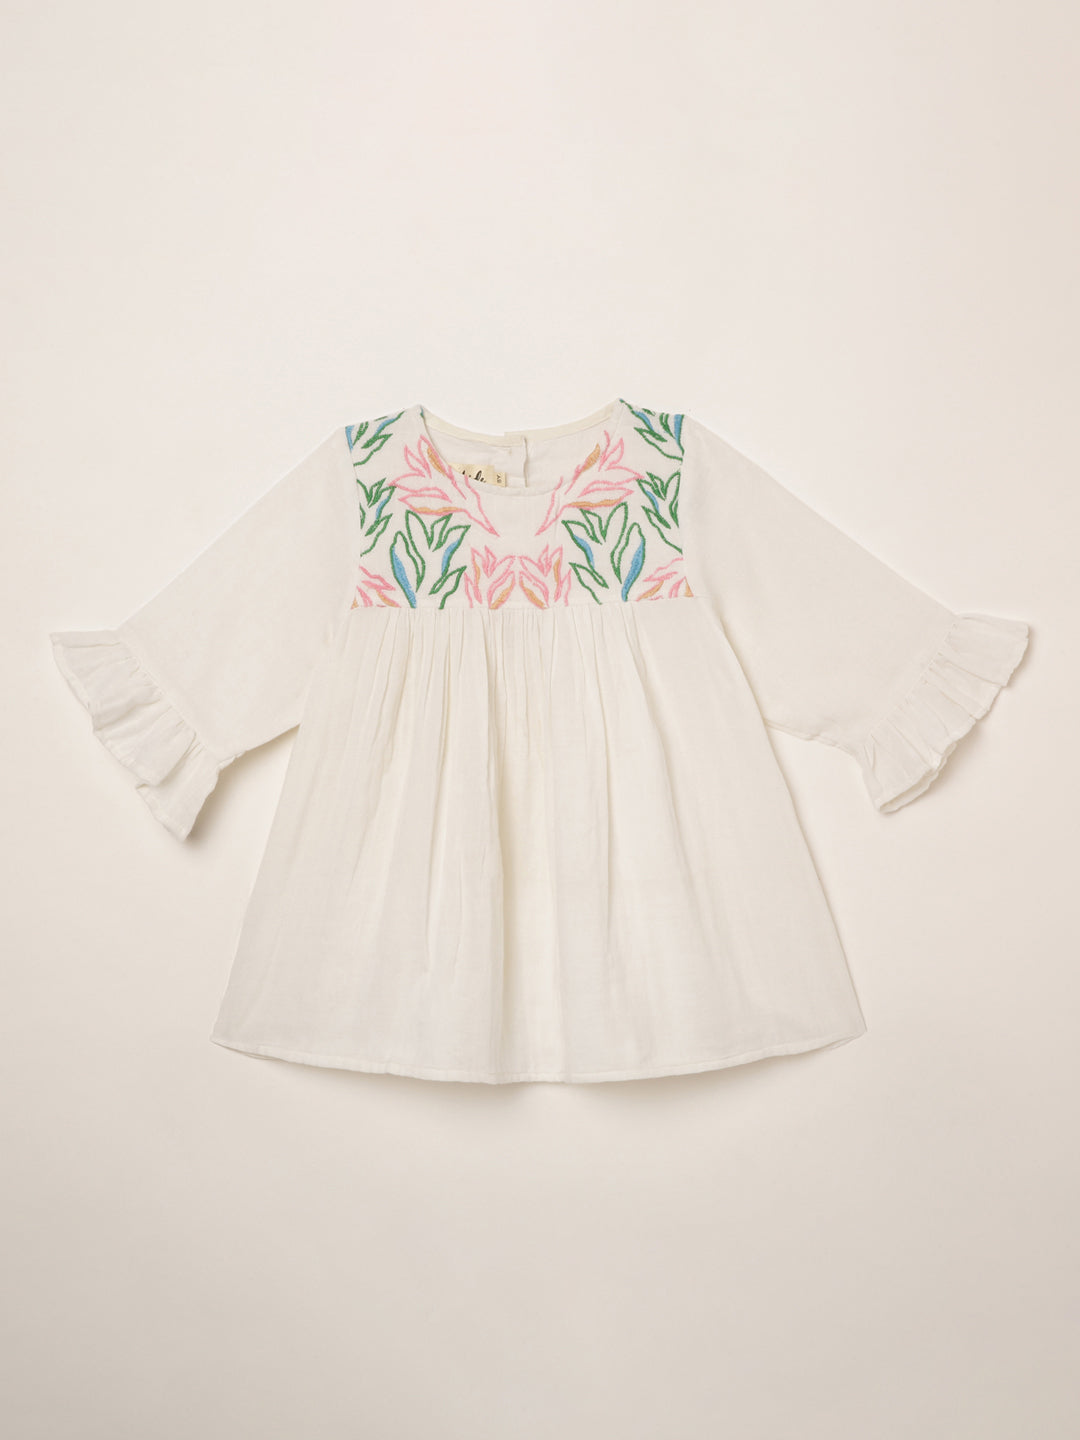 Embroidered Girls Top | Organic Cotton | 1yr to 8 yrs